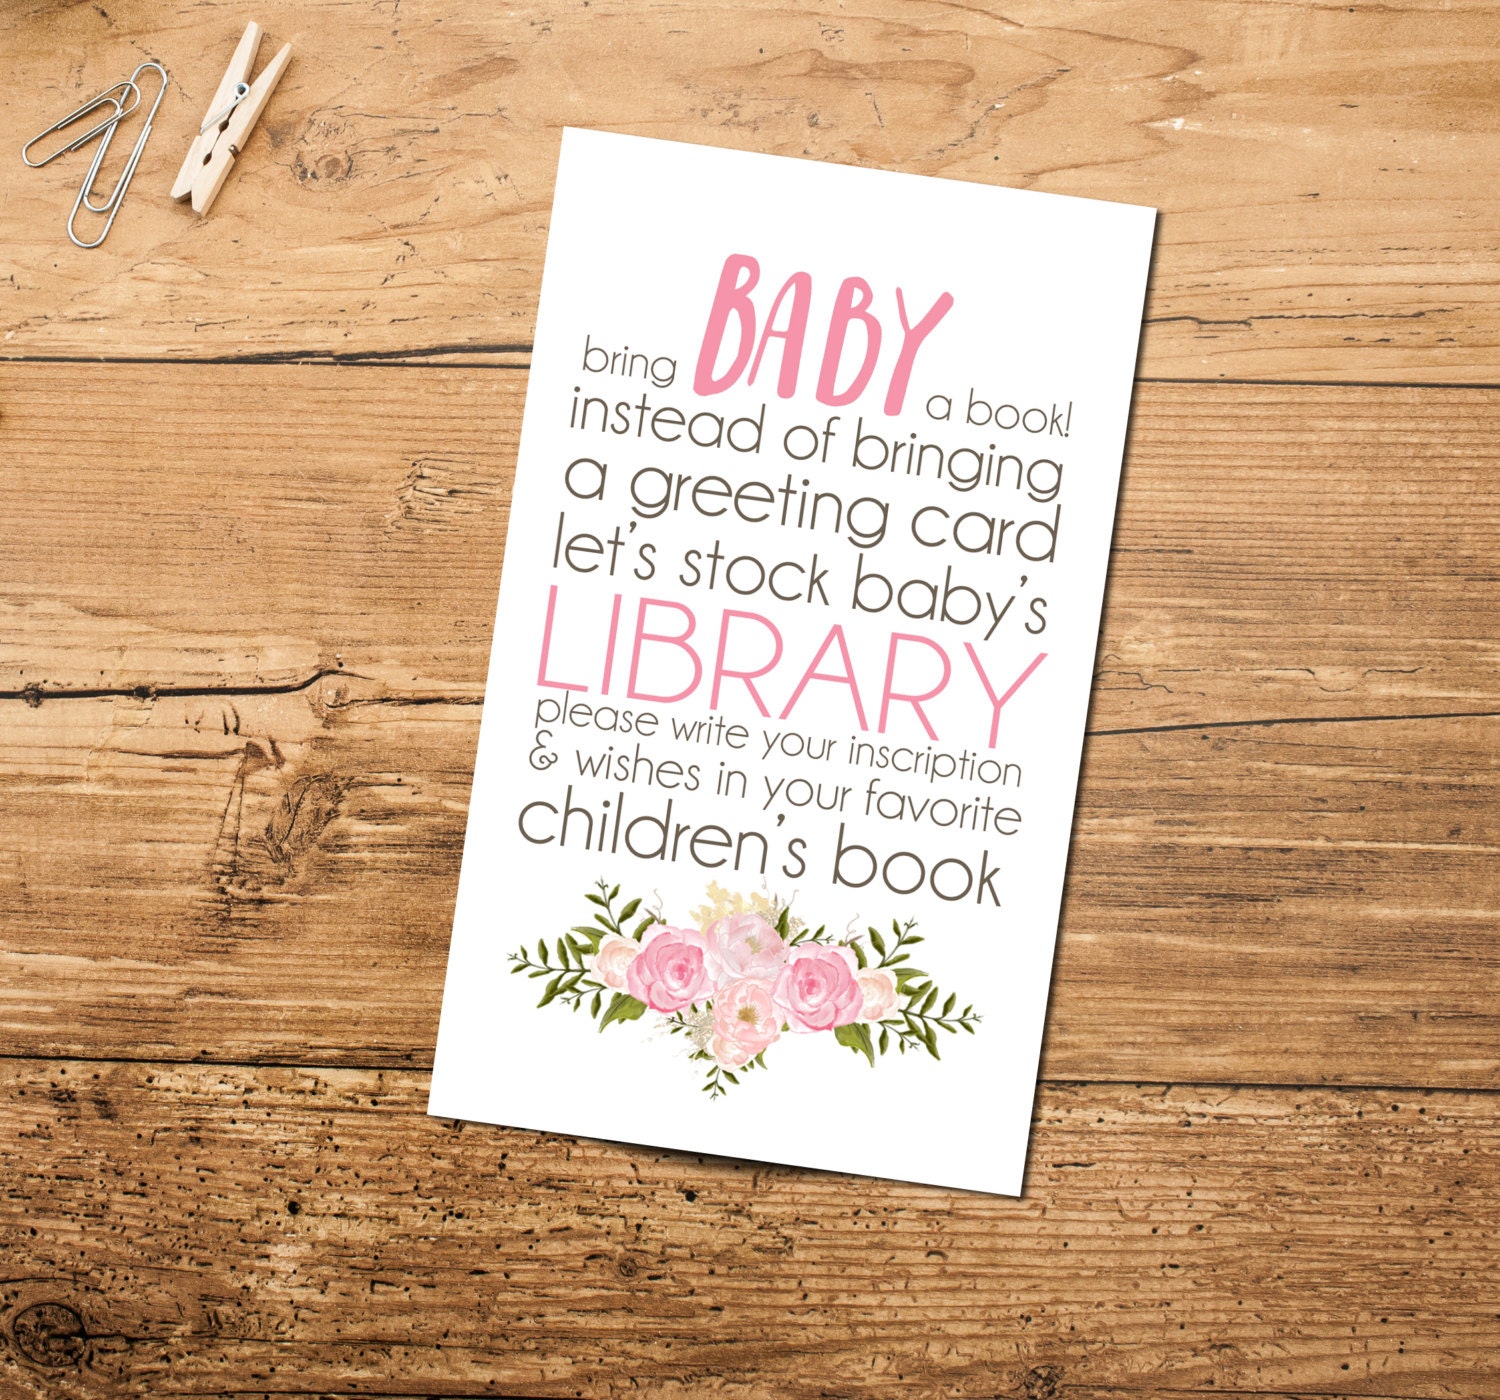 please-bring-a-book-instead-of-a-card-insert-for-baby-shower-etsy